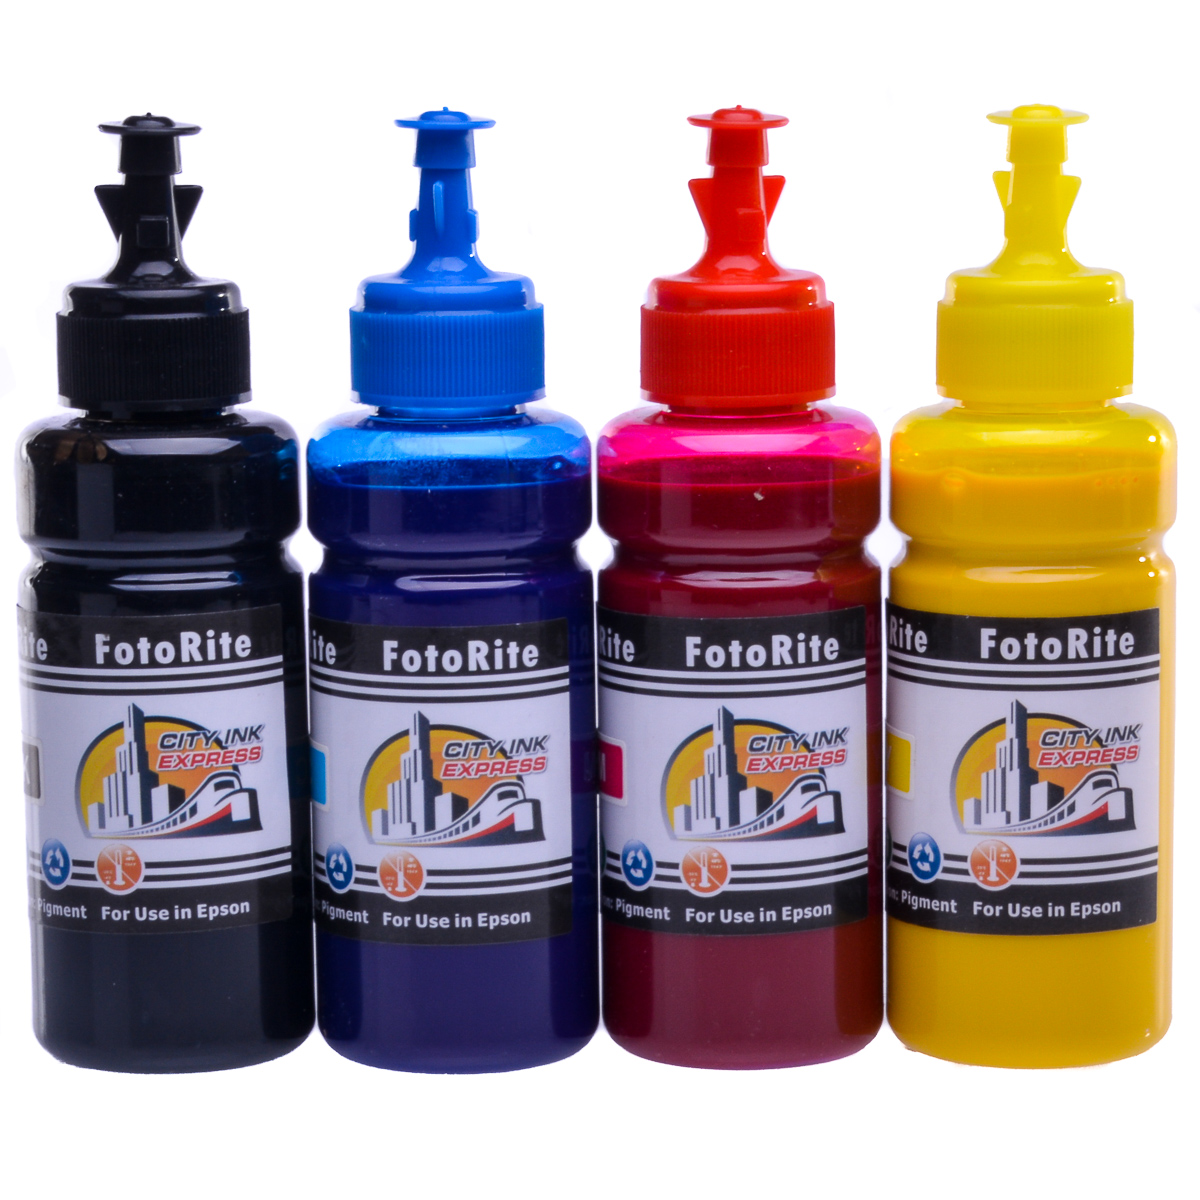 Cheap Multipack pigment ink refill replaces Epson XP-4100